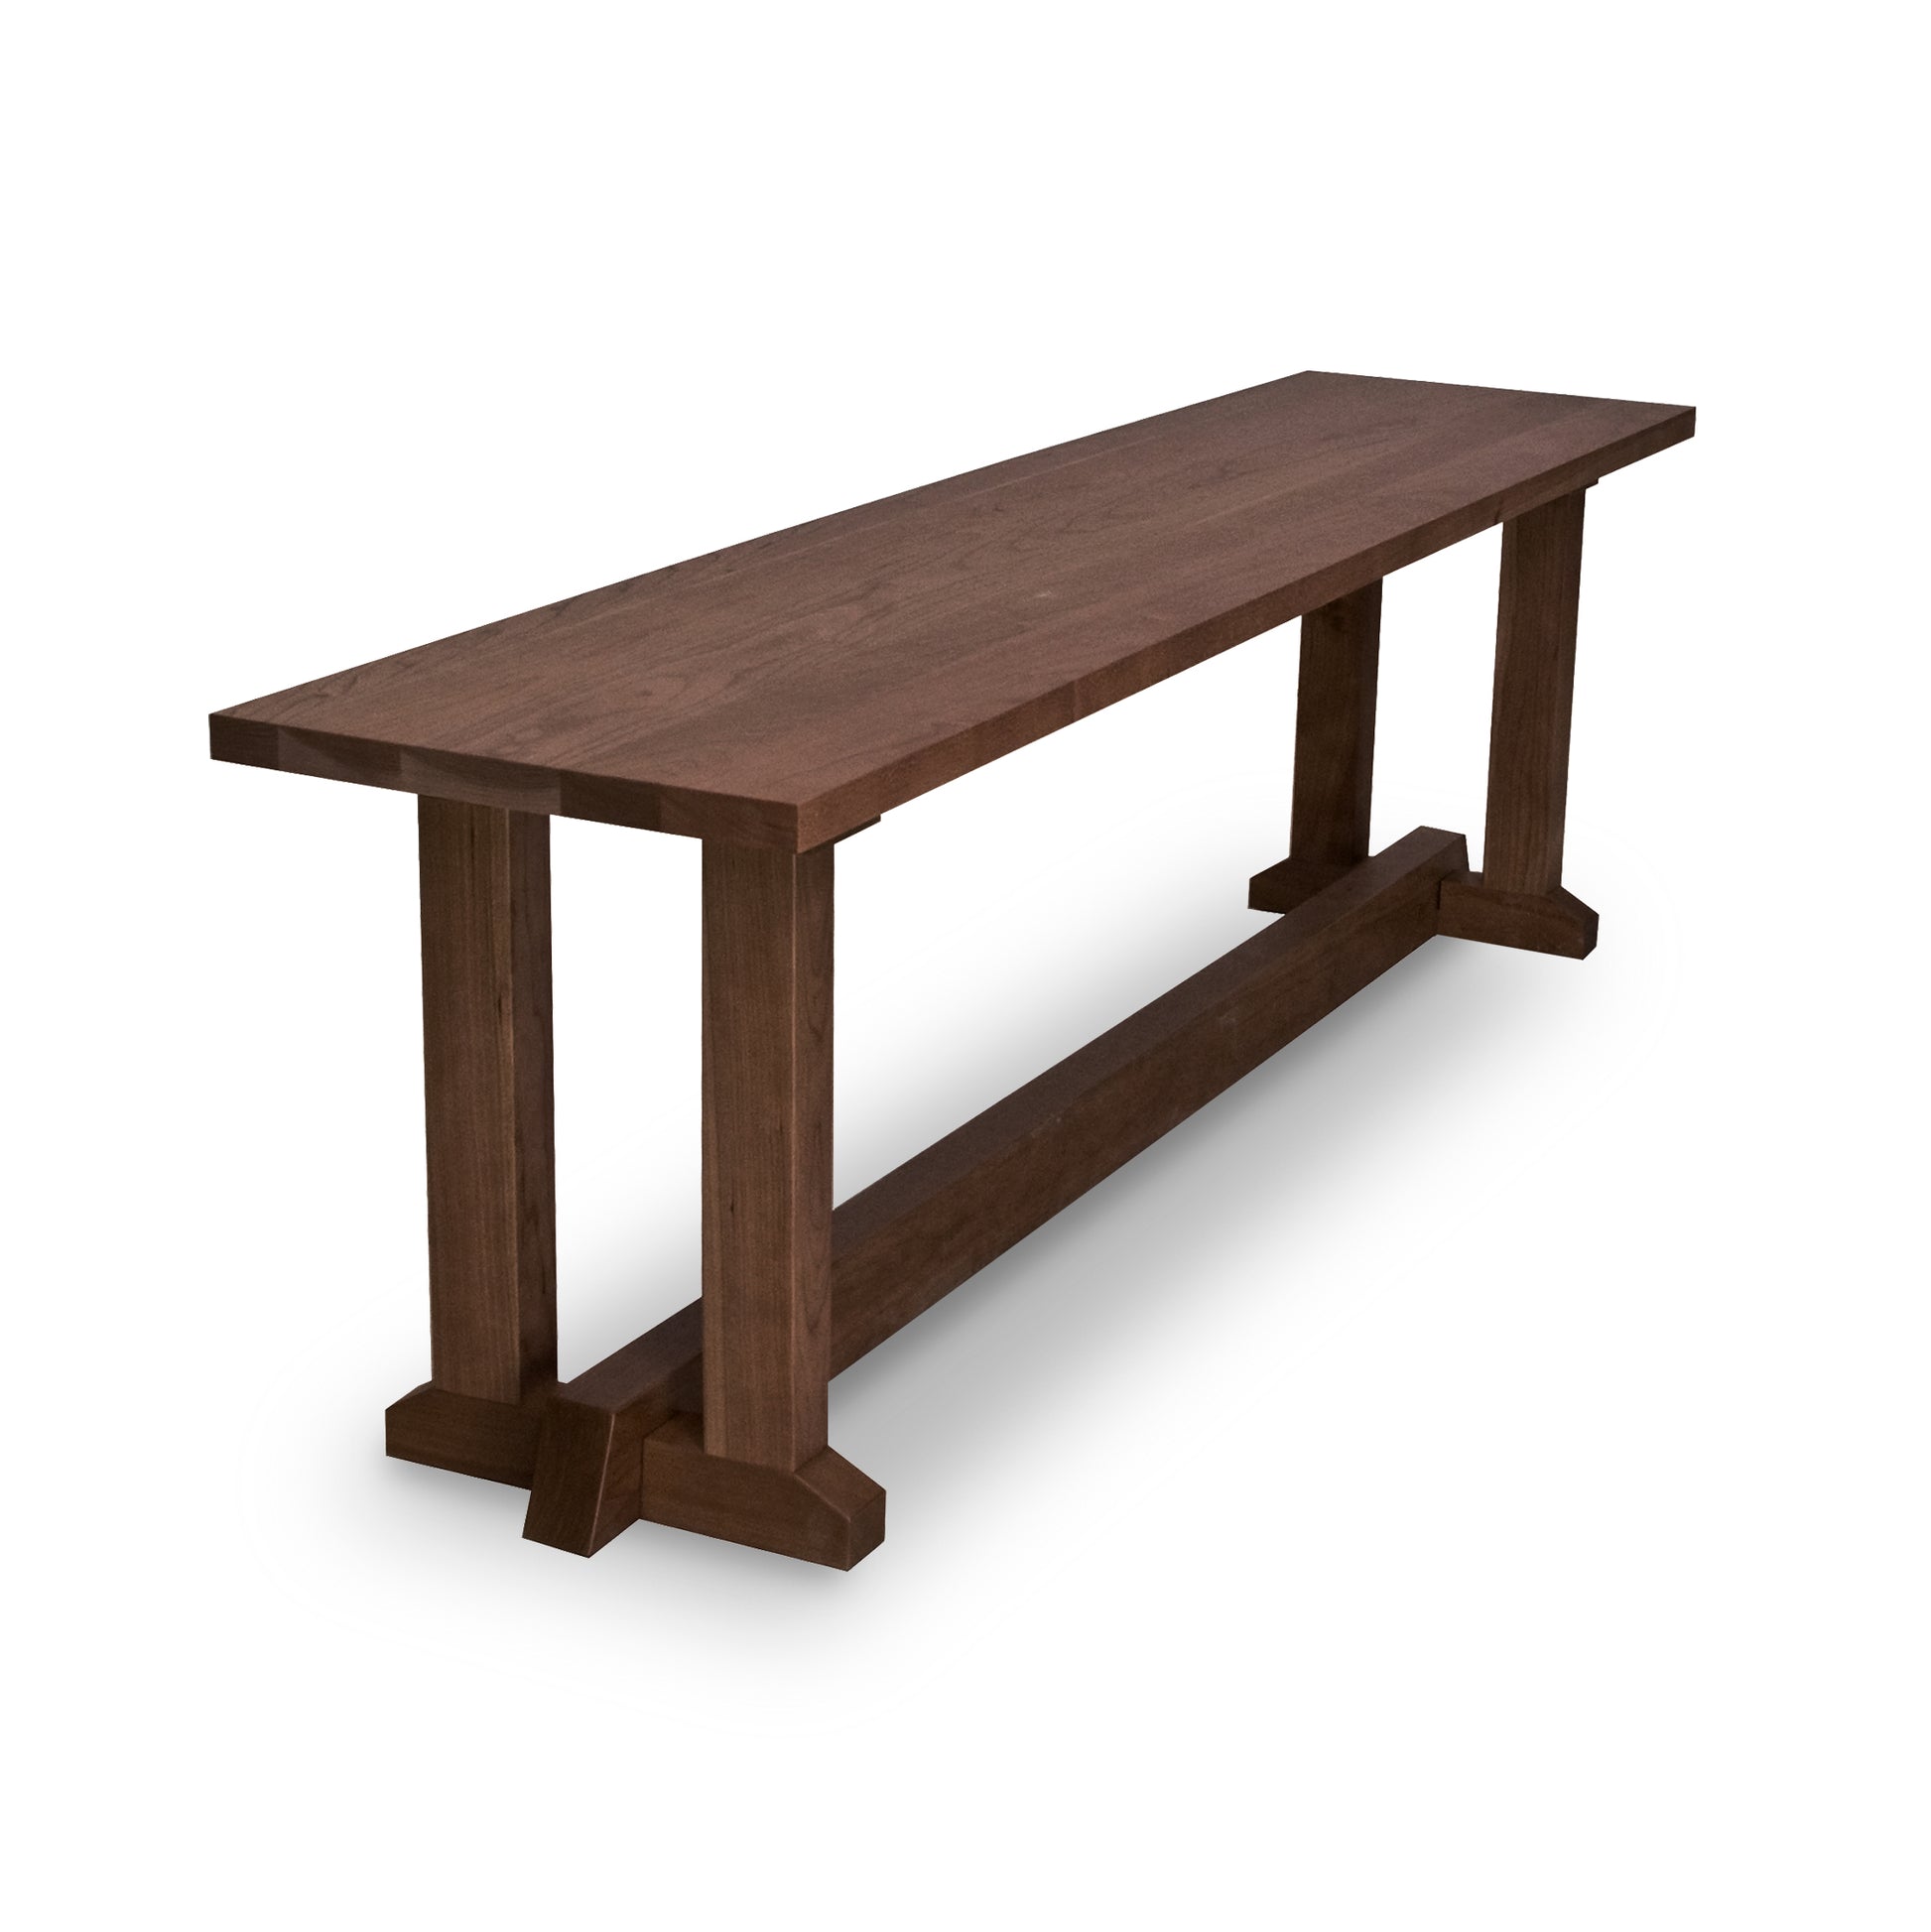 A sustainably harvested Lyndon Furniture Boston Trestle Bench with two legs on a white background.